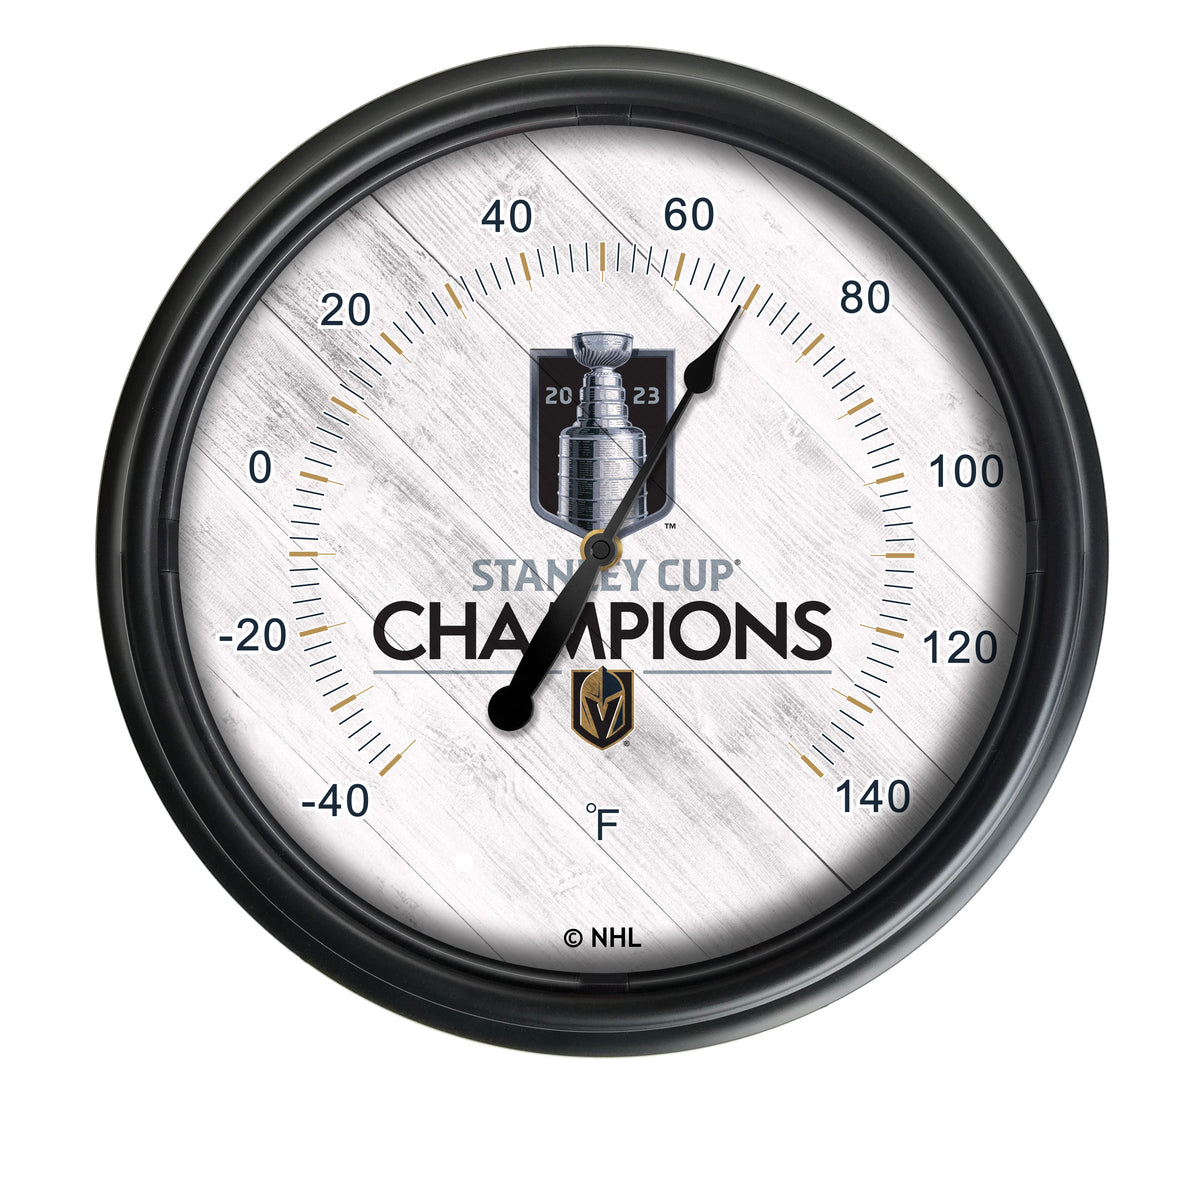 Vegas Golden Knights: Stanley Cup Champions - Pool Table Light - The Fan-Brand Black